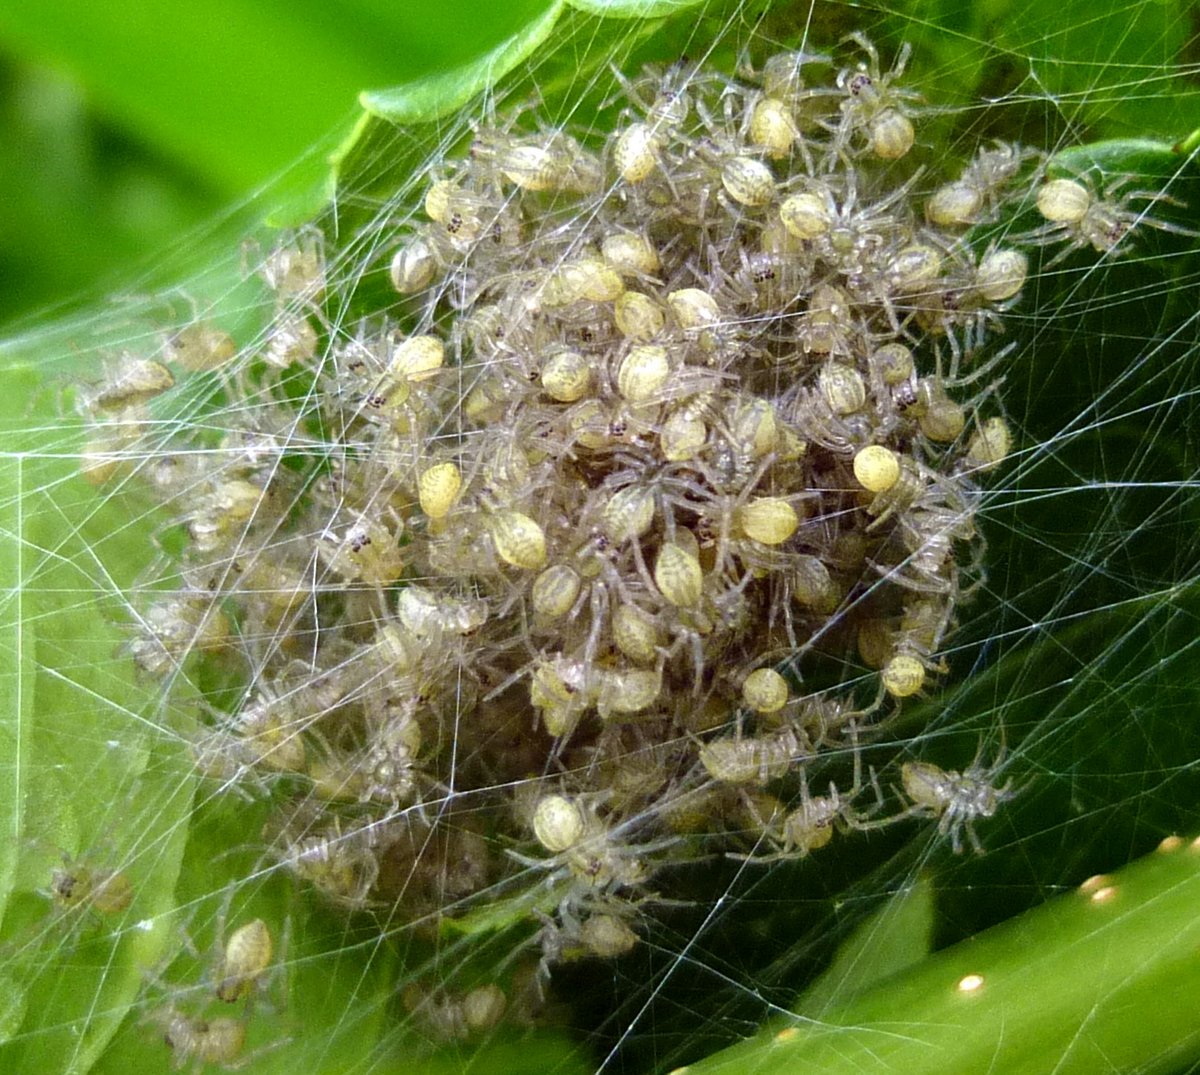 6. Baby Spiders Hatching